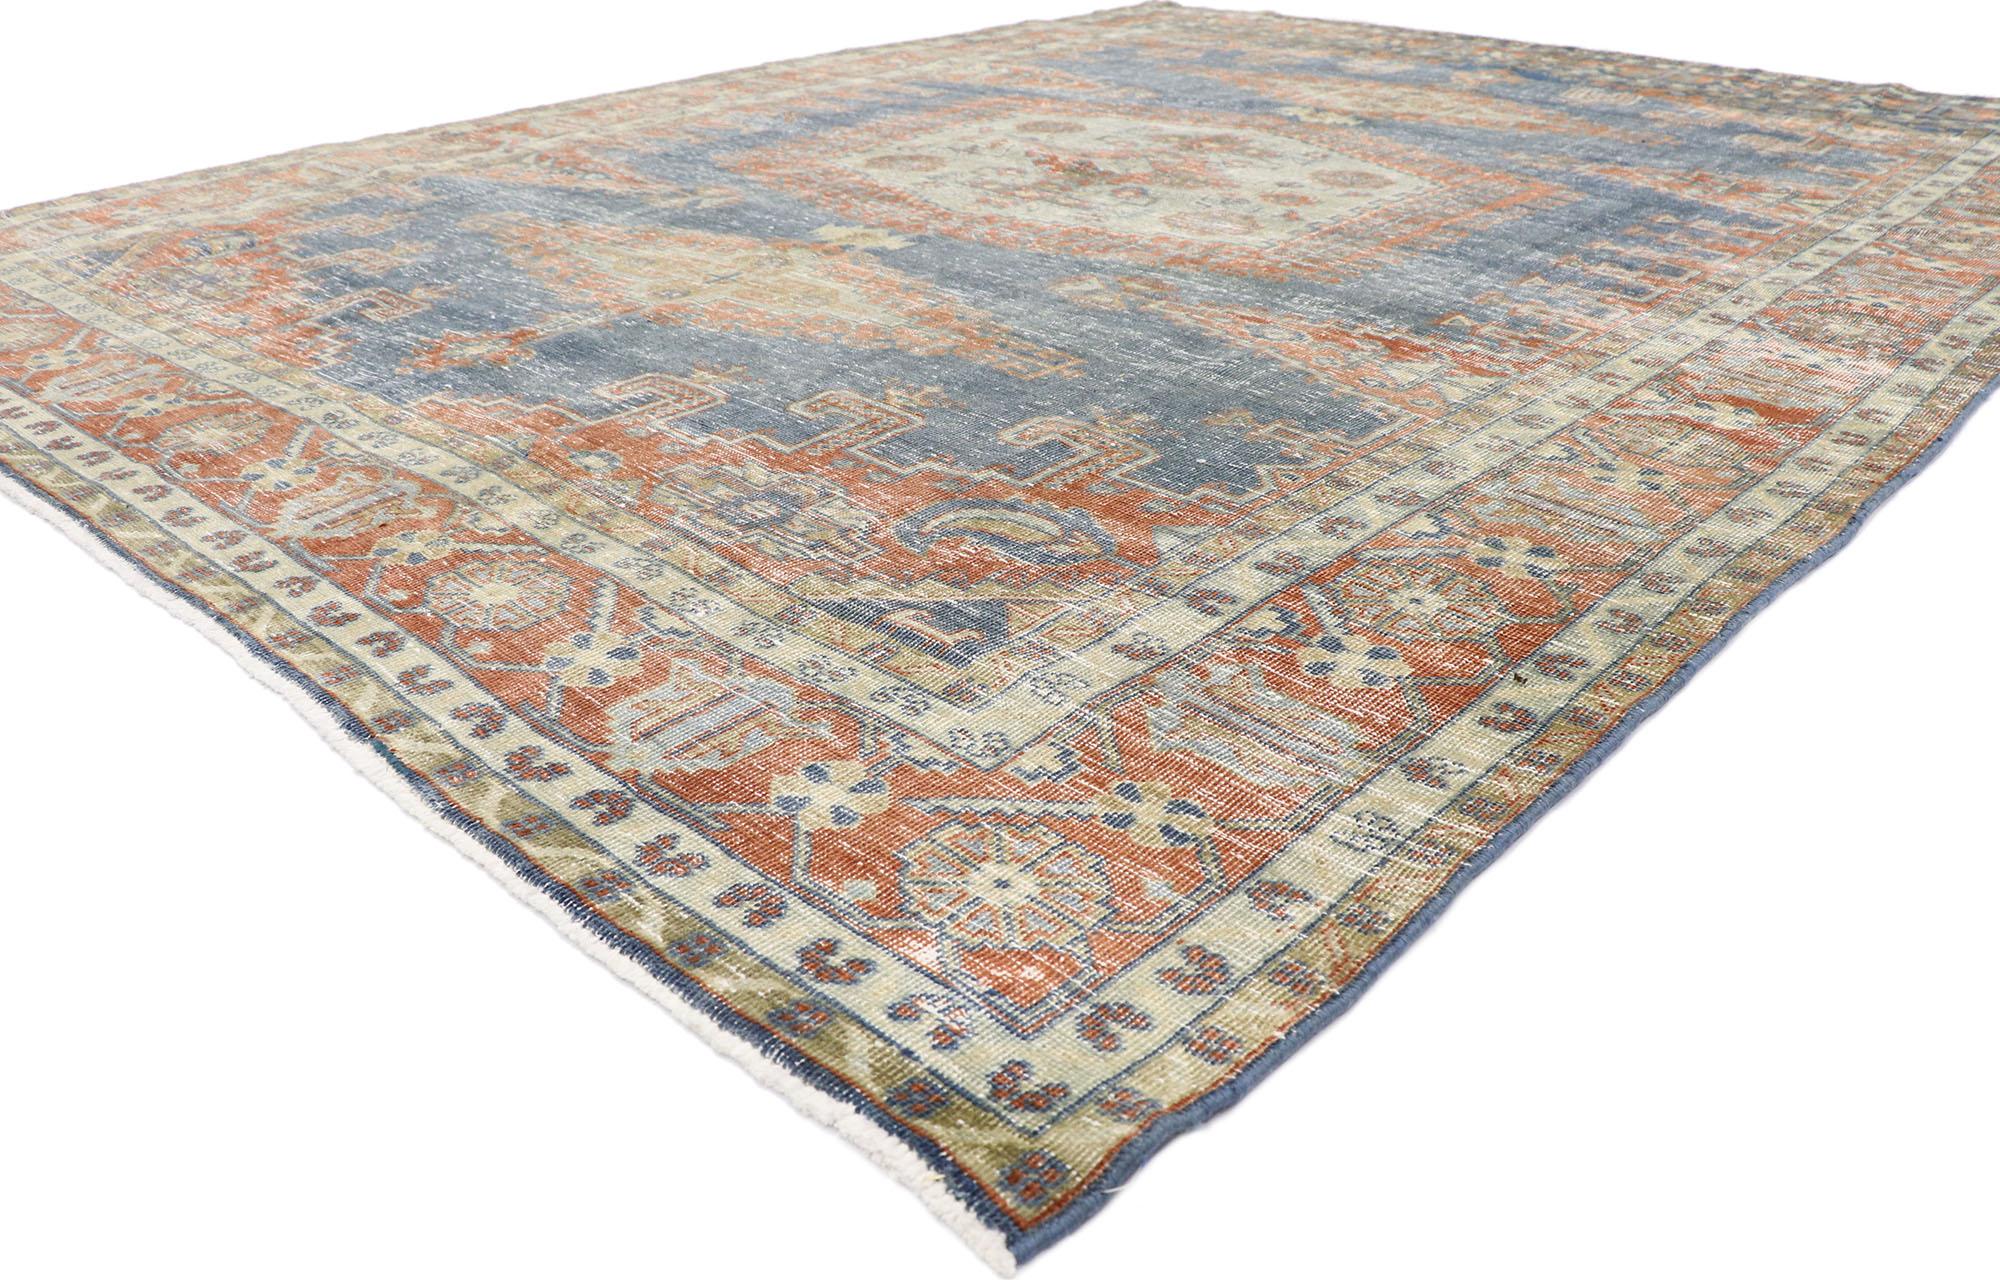 ?60967 Distressed Vintage Persian Viss Rug with Rustic Tribal Style 08'08 x 11'03. ?Emanating sophistication and nomadic charm with rugged beauty, this hand knotted wool distressed vintage Persian Viss rug beautifully embodies a rustic tribal style.